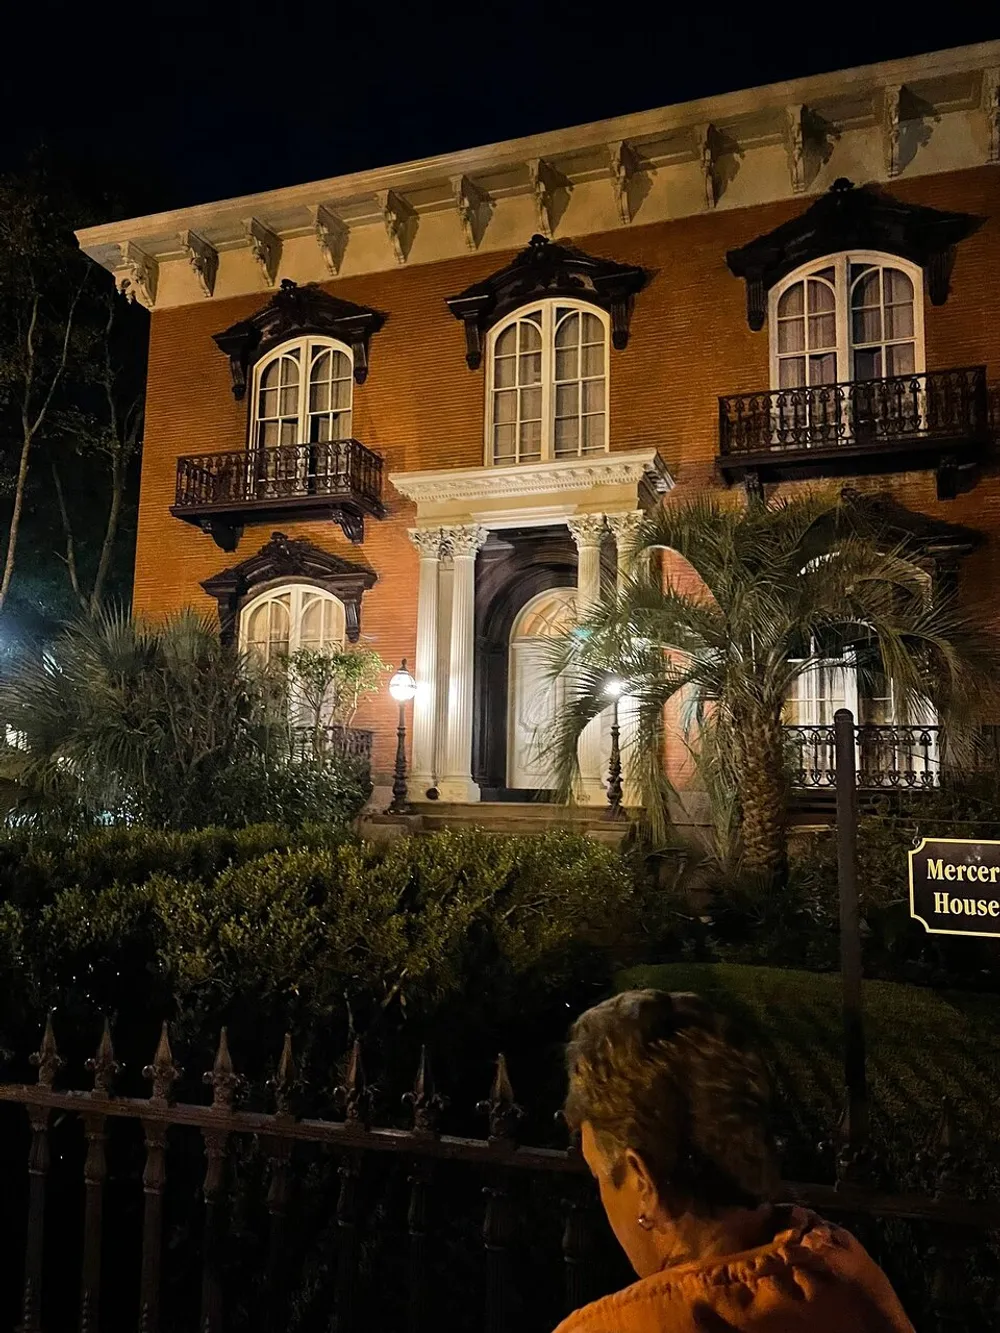 The image shows an illuminated historic brick building at night viewed by a person standing in the foreground with ornate balconies and a sign indicating it is the Mercer House